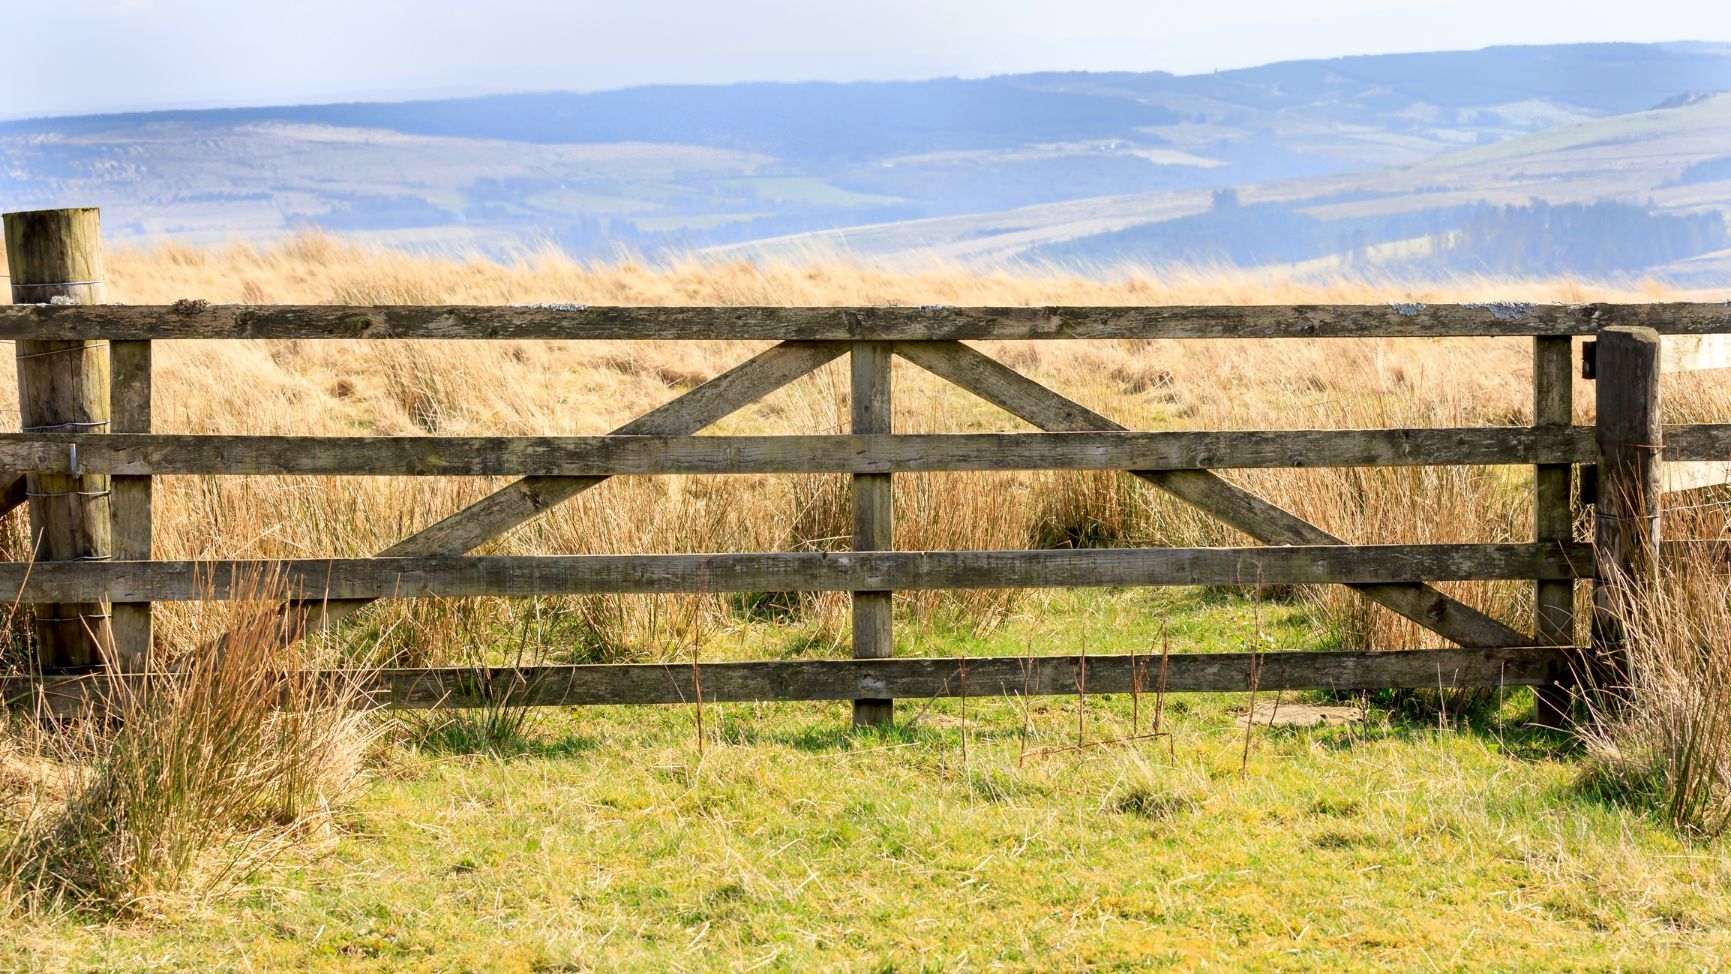 A wooden gate on Langholm Moore, looking out towards with mist covered hills of Cumbria in England.